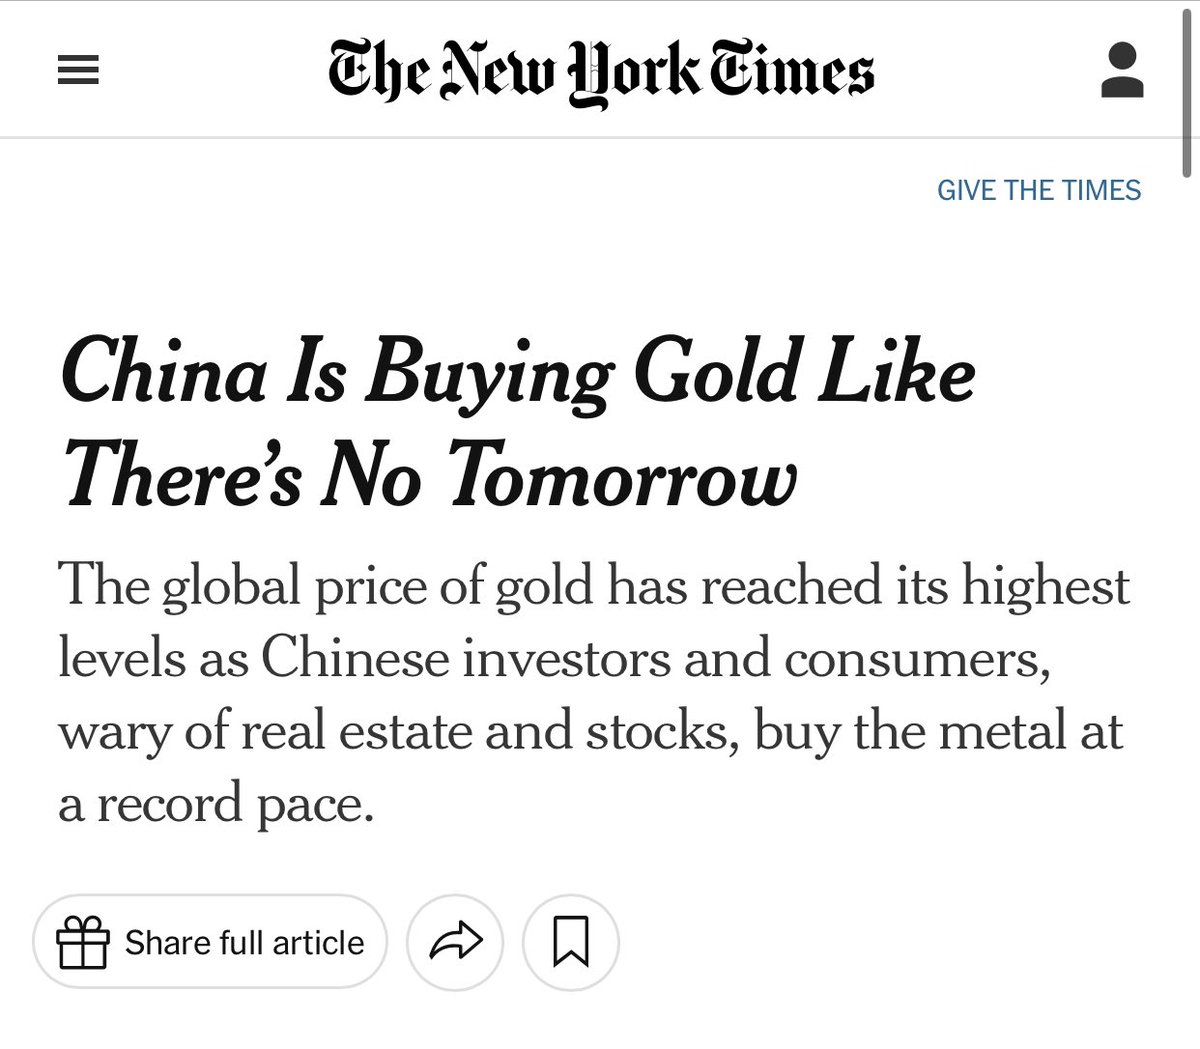 Some say China’s buying gold to hedge a coming CNY devaluation, but historically gold flowing OUT of a country portended future currency devaluations, not gold flowing IN. Consider US 1965-71, or S. Korea 1998, for example - gold flowed out, portending future currency weakness.